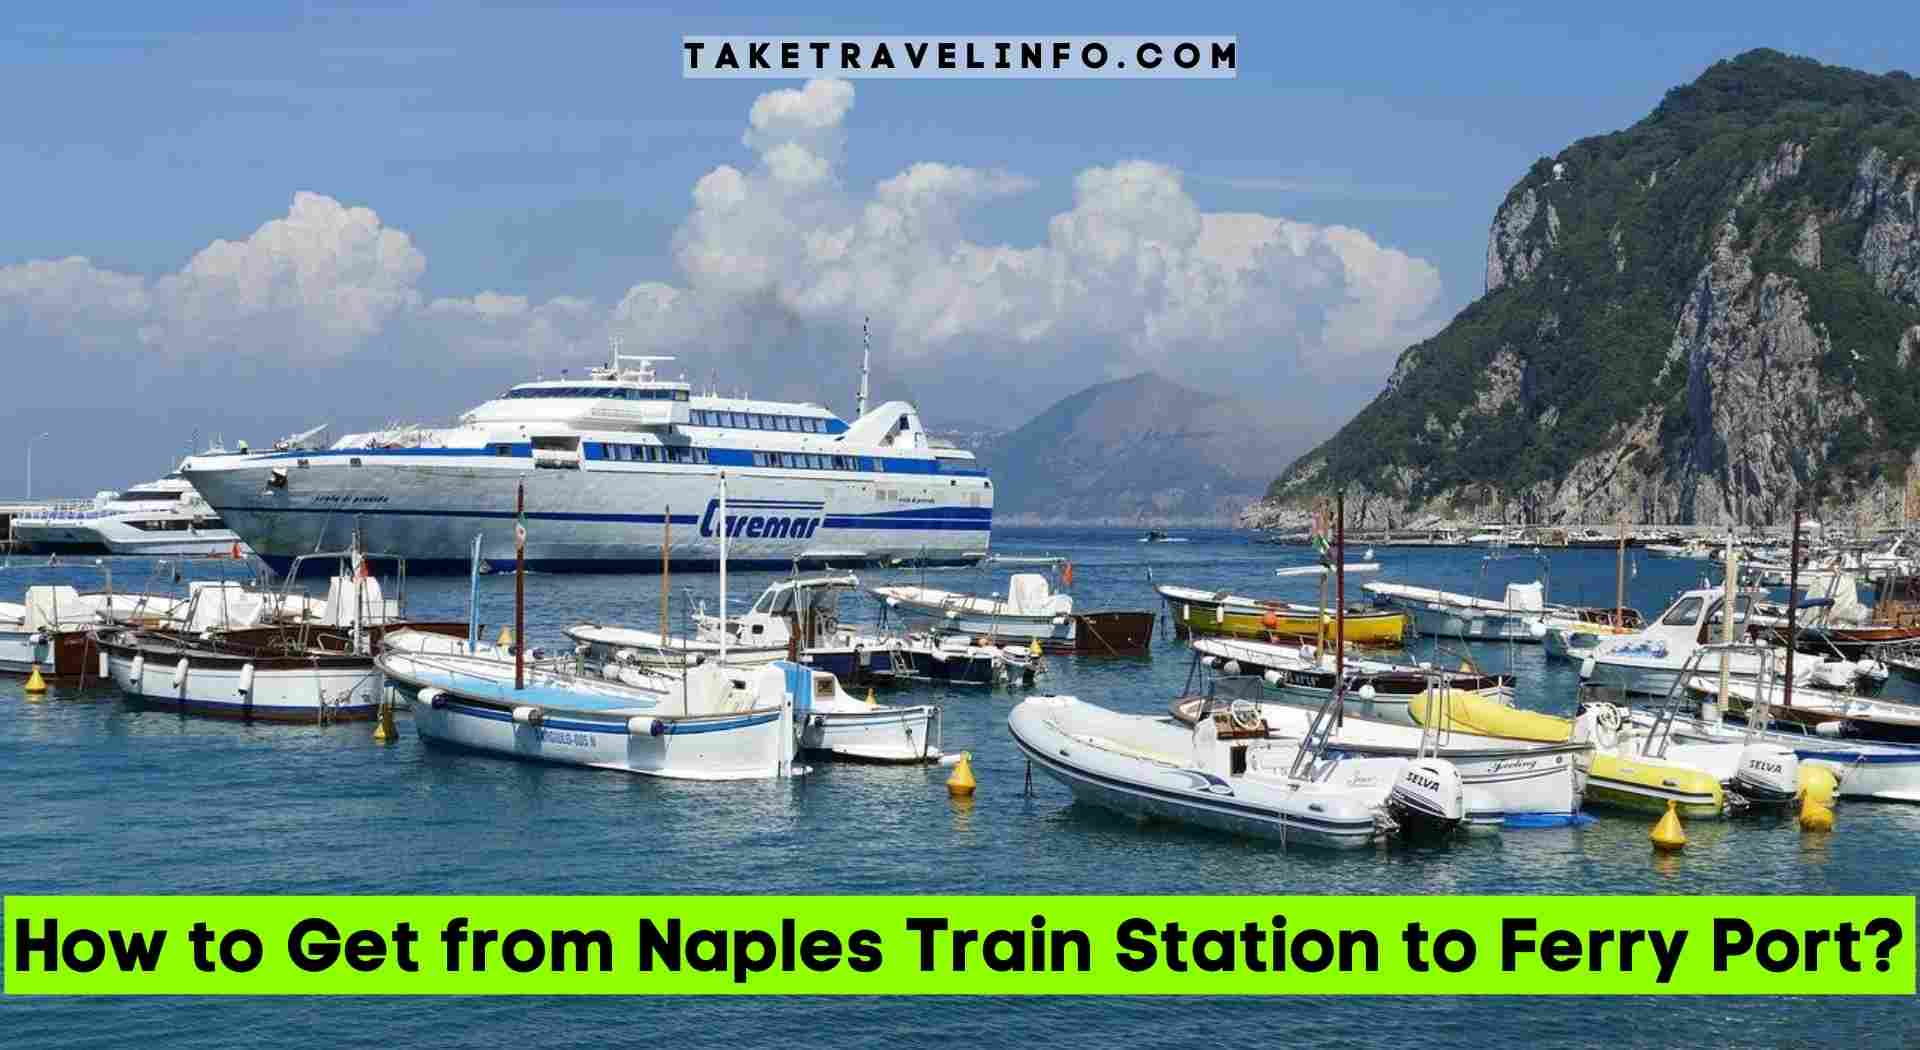 How to Get from Naples Train Station to Ferry Port?